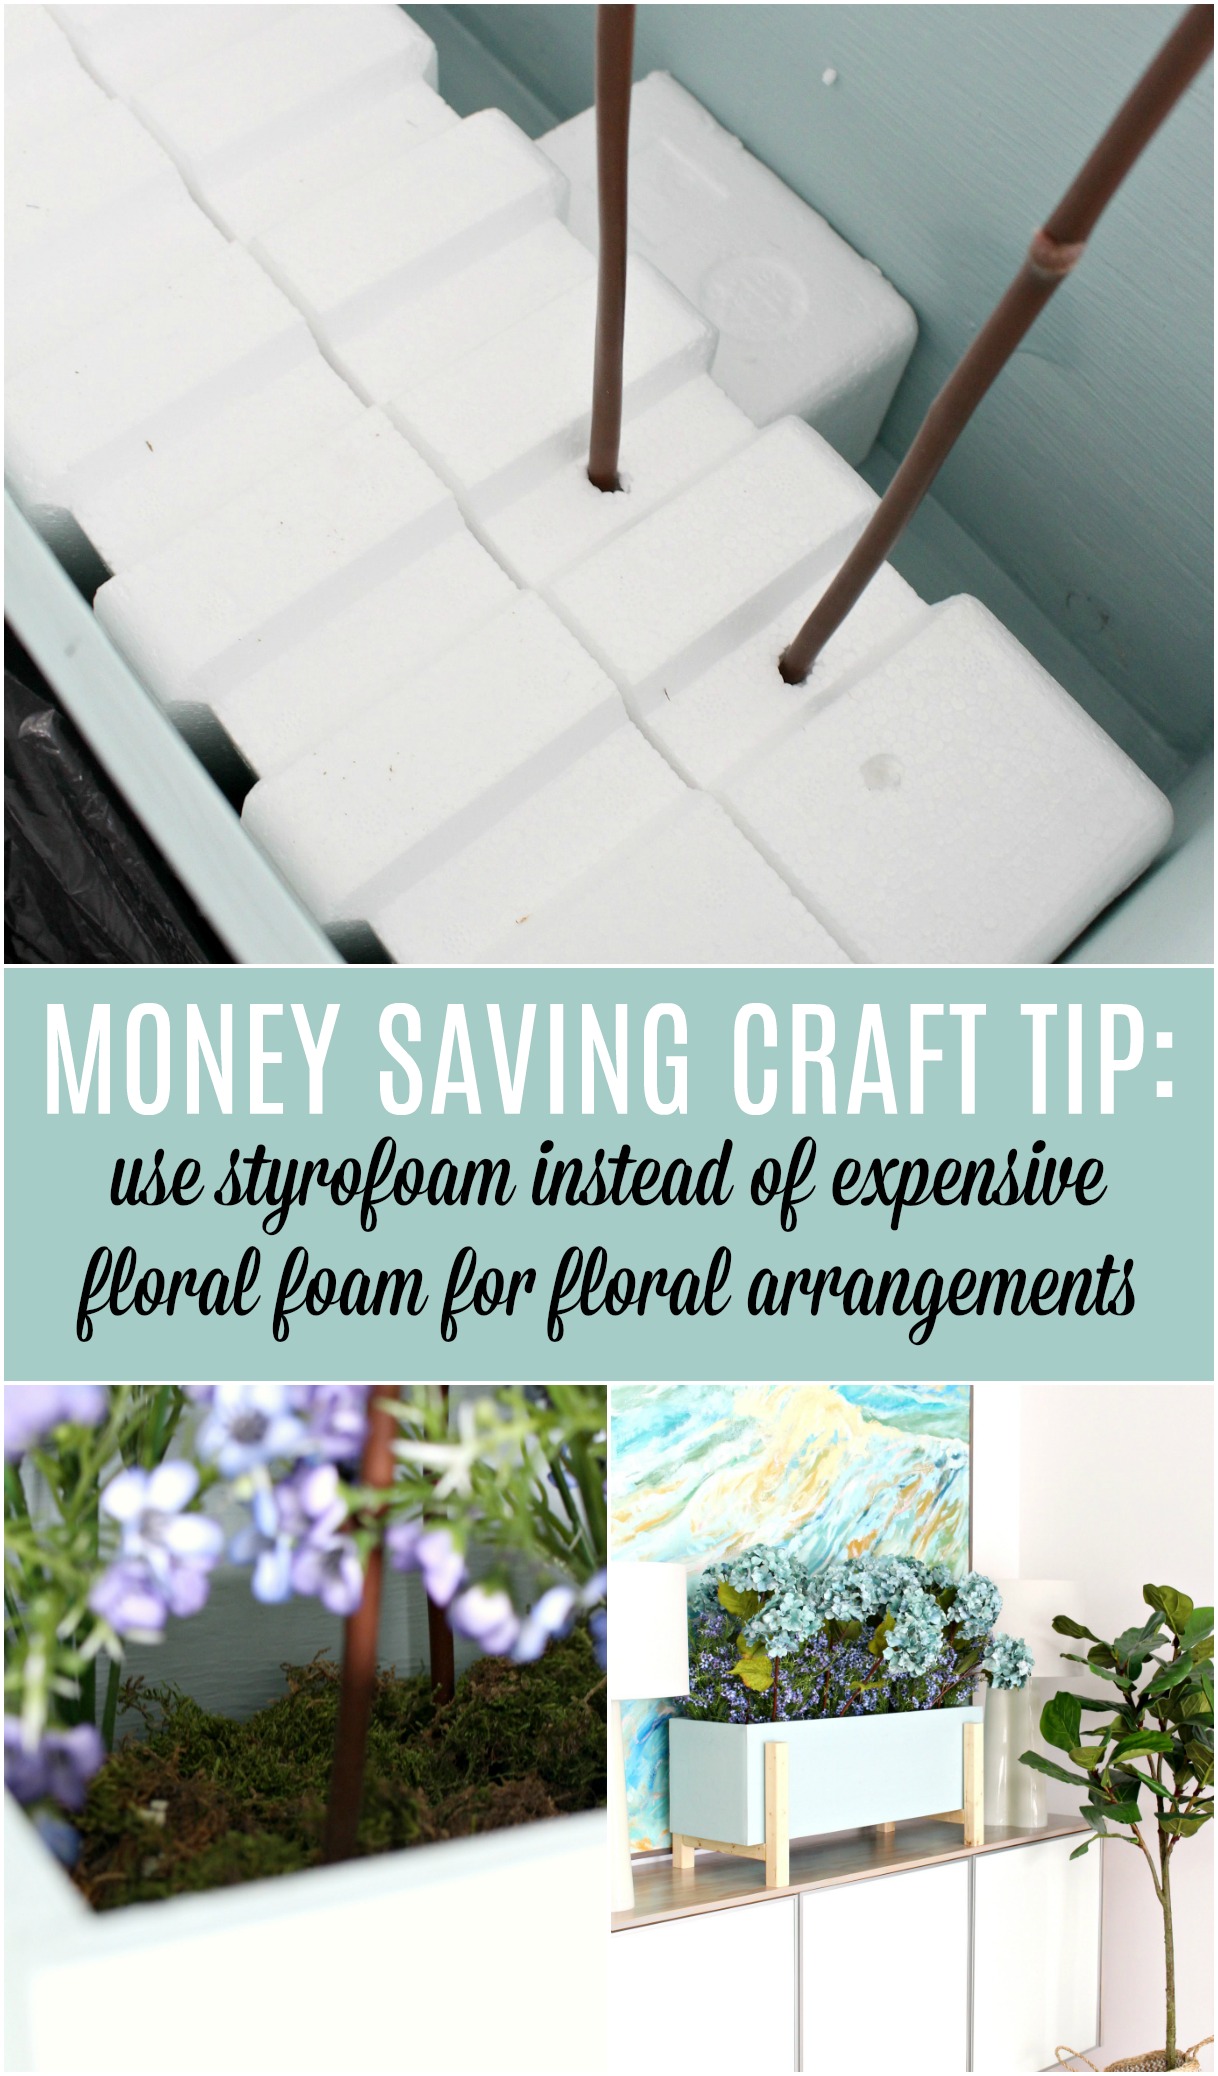 Money Saving Craft Tip: Use Styrofoam Instead of Expensive Floral Foam and Then Cover with Dollar Store Moss - Great Upcycle Idea! Save Money on Crafts, and Help the Planet Too! #savingmoney #moneysavingcrafts #moneysavingtips #crafttips #floralarrangement